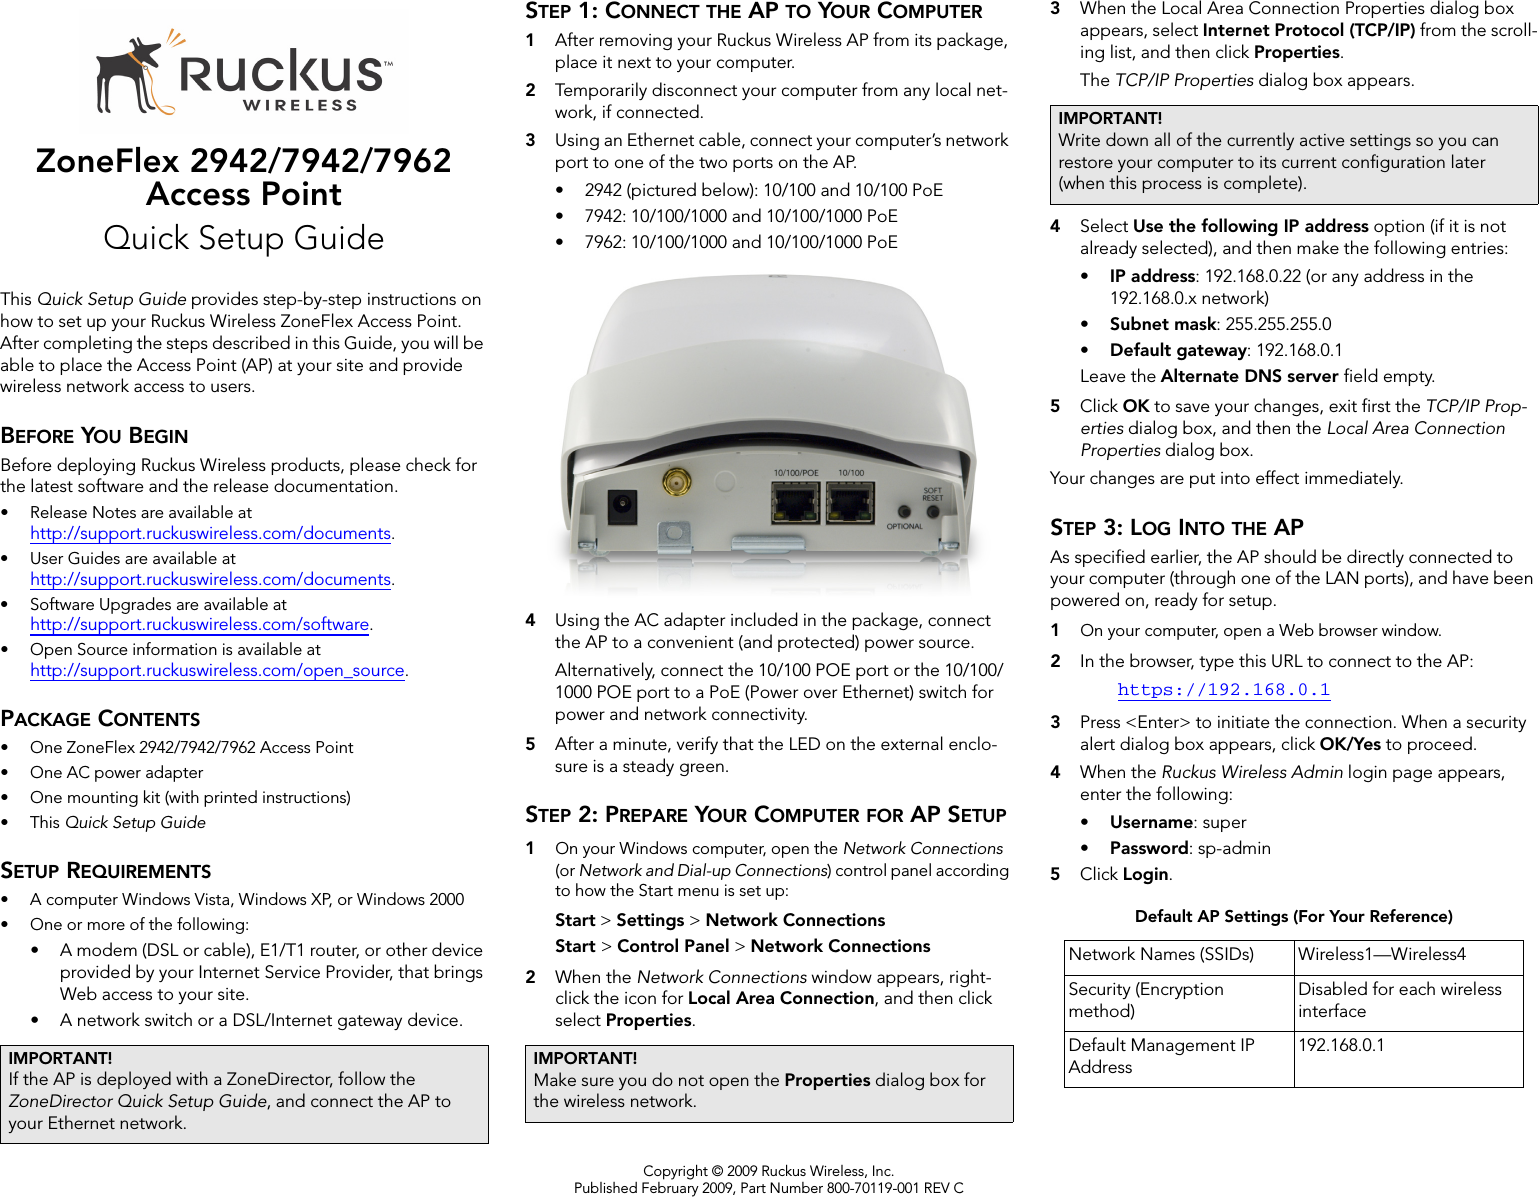 Copyright © 2009 Ruckus Wireless, Inc.Published February 2009, Part Number 800-70119-001 REV CZoneFlex 2942/7942/7962 Access PointQuick Setup GuideThis Quick Setup Guide provides step-by-step instructions on how to set up your Ruckus Wireless ZoneFlex Access Point. After completing the steps described in this Guide, you will be able to place the Access Point (AP) at your site and provide wireless network access to users.BEFORE YOU BEGINBefore deploying Ruckus Wireless products, please check for the latest software and the release documentation.• Release Notes are available at http://support.ruckuswireless.com/documents.• User Guides are available at http://support.ruckuswireless.com/documents.• Software Upgrades are available athttp://support.ruckuswireless.com/software.• Open Source information is available athttp://support.ruckuswireless.com/open_source.PACKAGE CONTENTS• One ZoneFlex 2942/7942/7962 Access Point• One AC power adapter• One mounting kit (with printed instructions)•This Quick Setup GuideSETUP REQUIREMENTS• A computer Windows Vista, Windows XP, or Windows 2000• One or more of the following:• A modem (DSL or cable), E1/T1 router, or other device provided by your Internet Service Provider, that brings Web access to your site. • A network switch or a DSL/Internet gateway device. STEP 1: CONNECT THE AP TO YOUR COMPUTER1After removing your Ruckus Wireless AP from its package, place it next to your computer.2Temporarily disconnect your computer from any local net-work, if connected.3Using an Ethernet cable, connect your computer’s network port to one of the two ports on the AP. • 2942 (pictured below): 10/100 and 10/100 PoE• 7942: 10/100/1000 and 10/100/1000 PoE• 7962: 10/100/1000 and 10/100/1000 PoE4Using the AC adapter included in the package, connect the AP to a convenient (and protected) power source. Alternatively, connect the 10/100 POE port or the 10/100/1000 POE port to a PoE (Power over Ethernet) switch for power and network connectivity.5After a minute, verify that the LED on the external enclo-sure is a steady green. STEP 2: PREPARE YOUR COMPUTER FOR AP SETUP1On your Windows computer, open the Network Connections (or Network and Dial-up Connections) control panel according to how the Start menu is set up: Start &gt; Settings &gt; Network ConnectionsStart &gt; Control Panel &gt; Network Connections2When the Network Connections window appears, right-click the icon for Local Area Connection, and then click select Properties. 3When the Local Area Connection Properties dialog box appears, select Internet Protocol (TCP/IP) from the scroll-ing list, and then click Properties. The TCP/IP Properties dialog box appears.4Select Use the following IP address option (if it is not already selected), and then make the following entries:•IP address: 192.168.0.22 (or any address in the 192.168.0.x network)•Subnet mask: 255.255.255.0•Default gateway: 192.168.0.1Leave the Alternate DNS server field empty.5Click OK to save your changes, exit first the TCP/IP Prop-erties dialog box, and then the Local Area Connection Properties dialog box. Your changes are put into effect immediately. STEP 3: LOG INTO THE APAs specified earlier, the AP should be directly connected to your computer (through one of the LAN ports), and have been powered on, ready for setup.1On your computer, open a Web browser window.2In the browser, type this URL to connect to the AP: https://192.168.0.13Press &lt;Enter&gt; to initiate the connection. When a security alert dialog box appears, click OK/Yes to proceed.4When the Ruckus Wireless Admin login page appears, enter the following: •Username: super•Password: sp-admin5Click Login.IMPORTANT!If the AP is deployed with a ZoneDirector, follow the ZoneDirector Quick Setup Guide, and connect the AP to your Ethernet network.IMPORTANT!Make sure you do not open the Properties dialog box for the wireless network.IMPORTANT!Write down all of the currently active settings so you can restore your computer to its current configuration later (when this process is complete).Default AP Settings (For Your Reference)Network Names (SSIDs) Wireless1—Wireless4Security (Encryption method)Disabled for each wireless interfaceDefault Management IP Address192.168.0.1